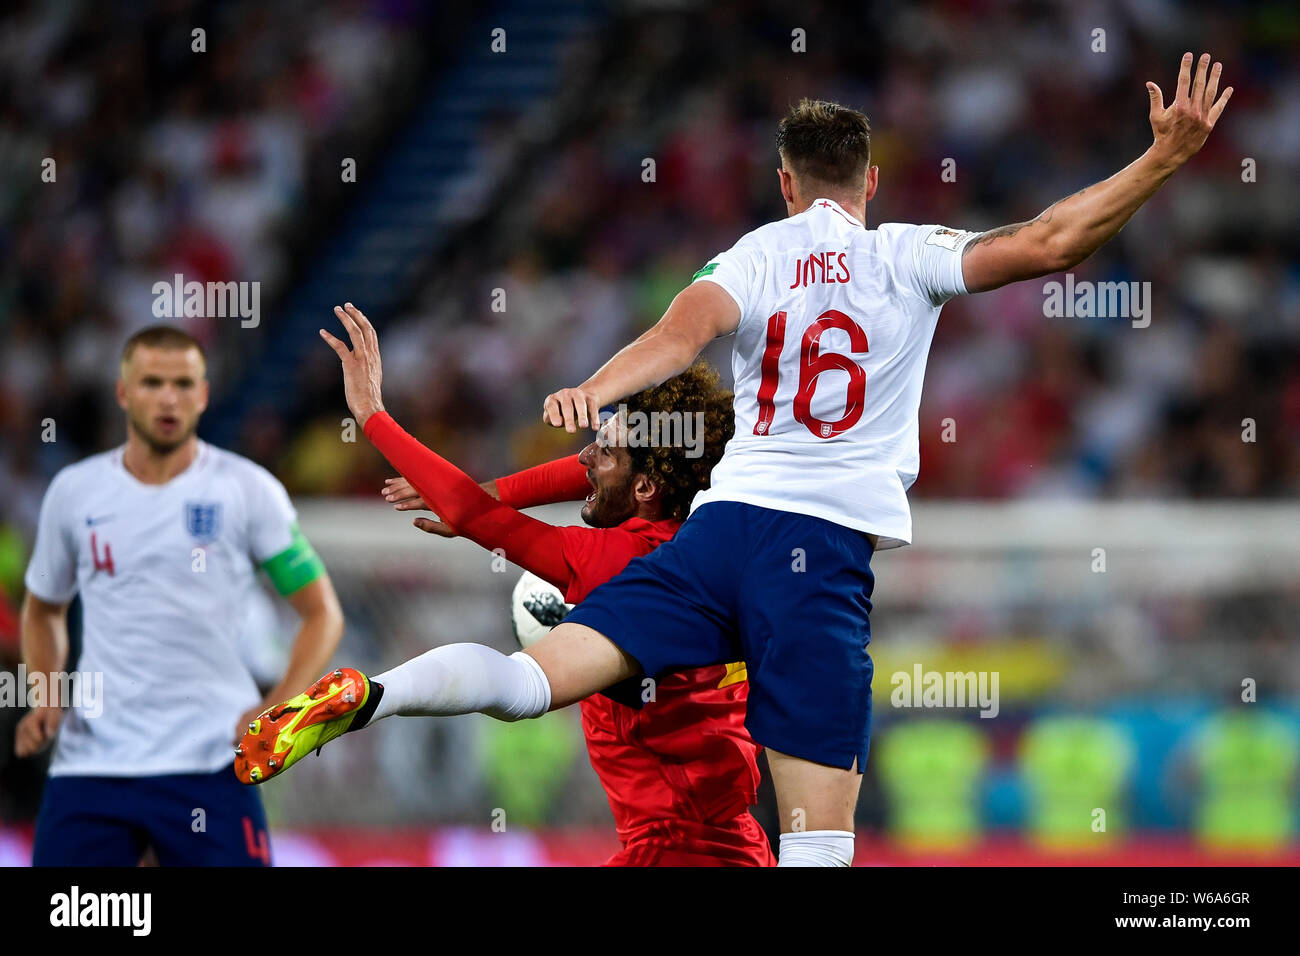 Phil Jones of England, right, challenges a player of Belgium in their Group G match during the 2018 FIFA World Cup in Kaliningrad, Russia, 28 June 201 Stock Photo